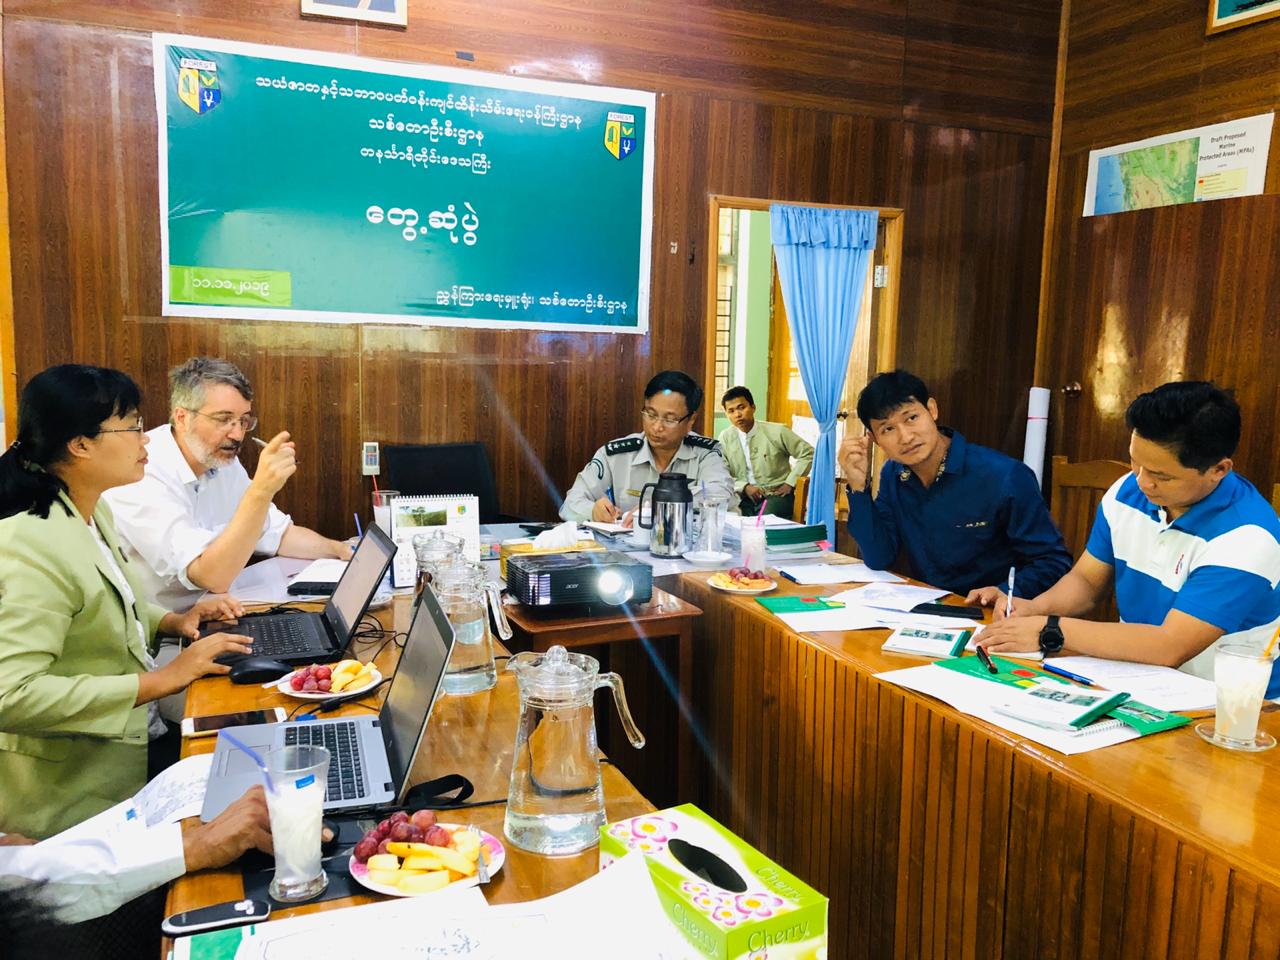 Meeting with the head of the Forest Department of the Karen National Union (KNU), Mr Pdoh Saw Ehna, and one of his collaborators at the regional office for the Tanintharyi region of the Myanmar Forest Department to discuss  NFI activities in ethnic Karen areas. Dawei, 18/11/ 2019.